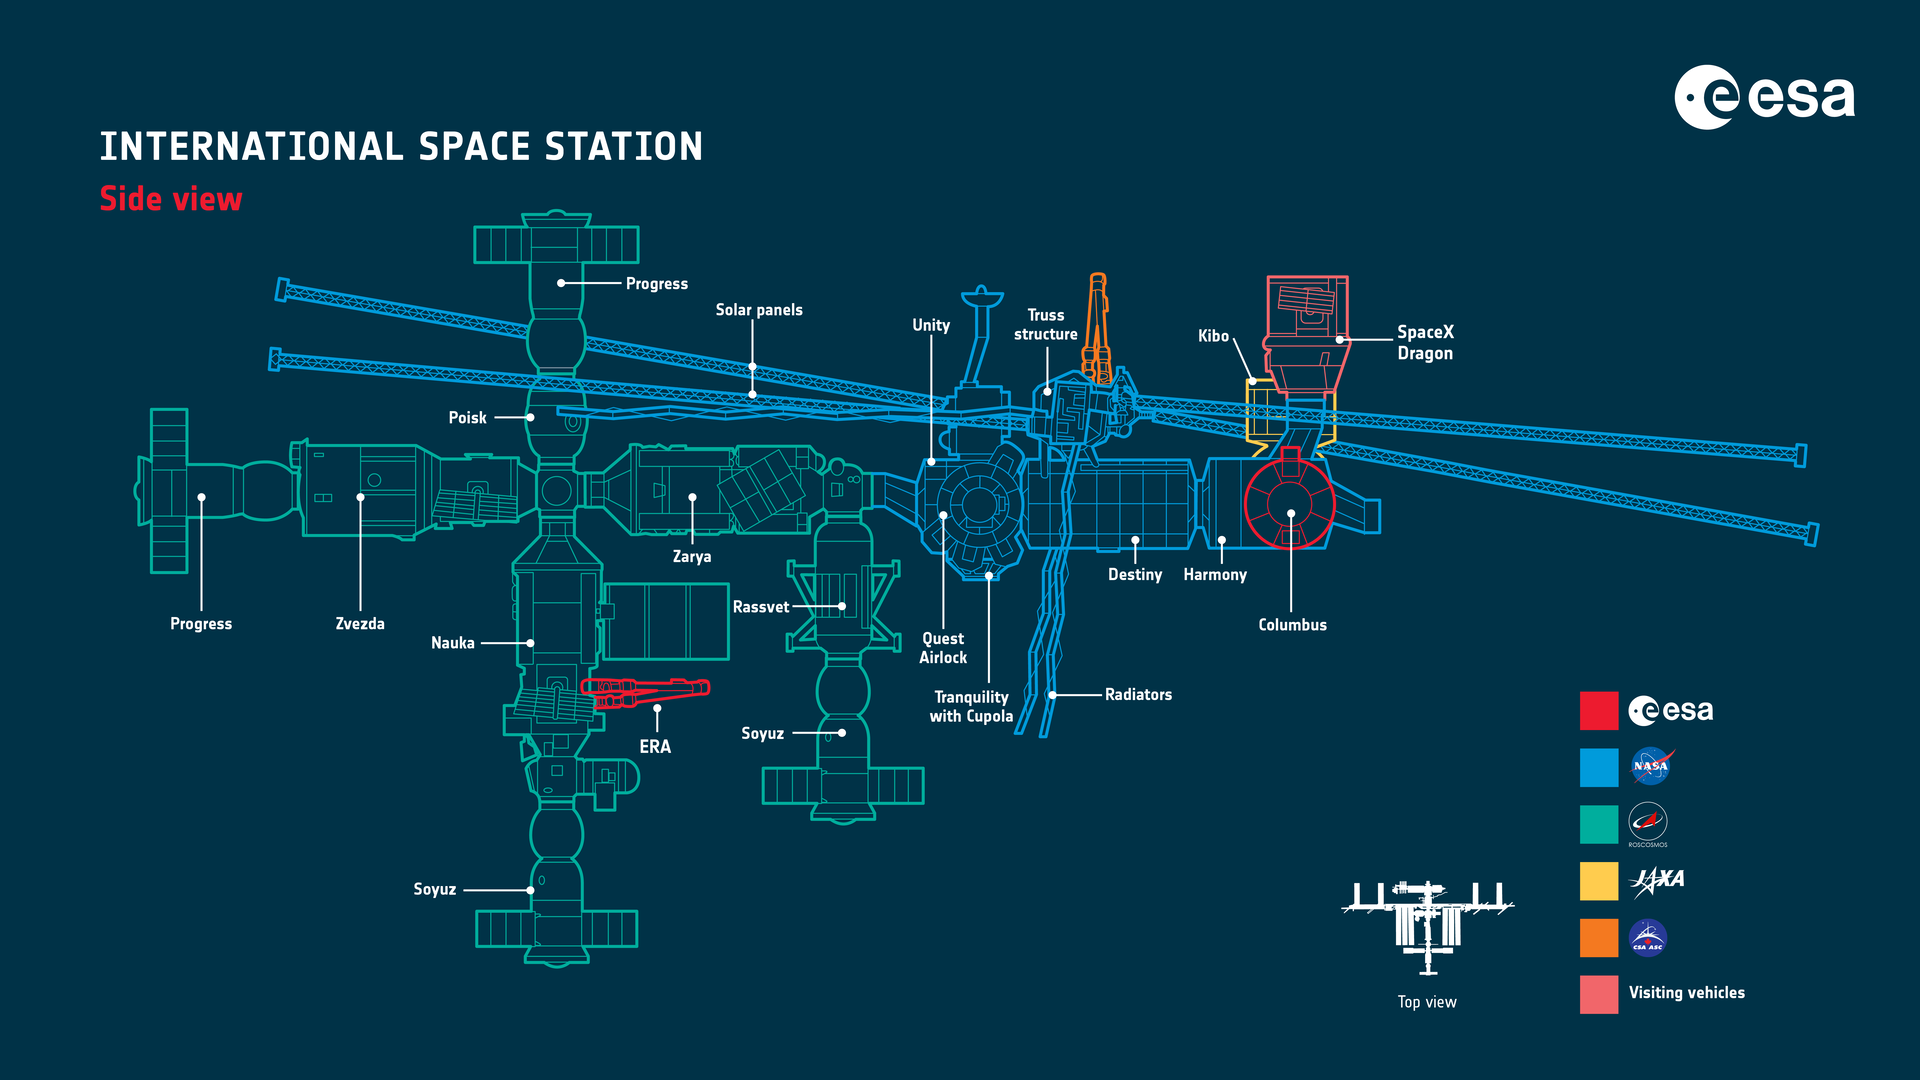 Infographic showing a side view of the International Space Station and its elements 